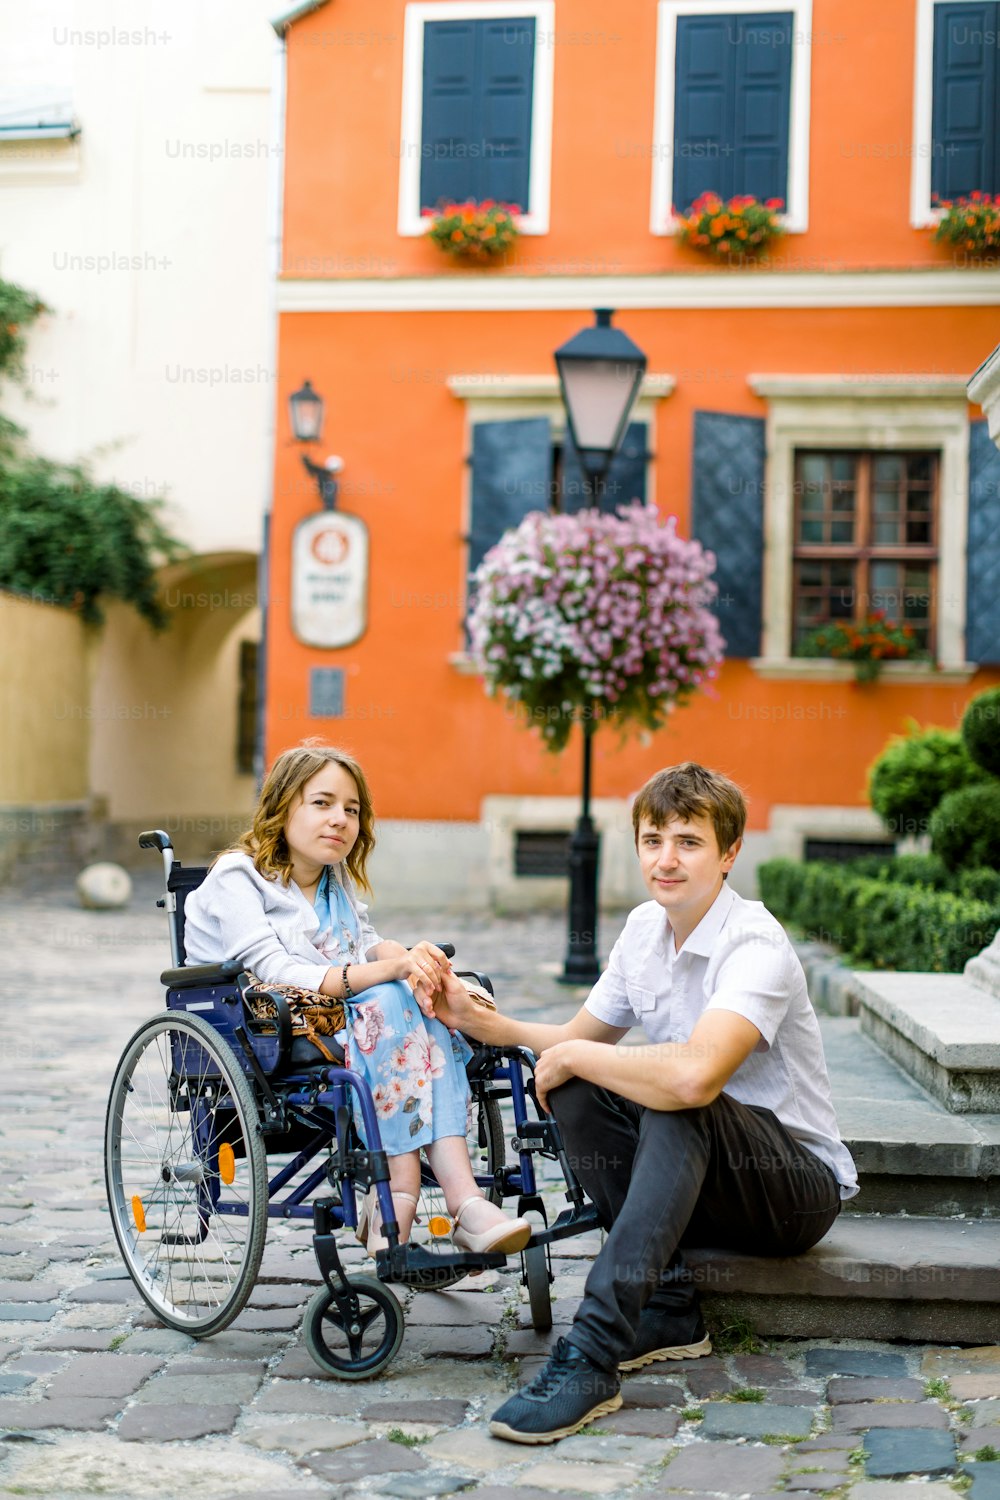 Couple in love in old city center. Pretty young girl with disease on a wheelchair and her lovely man, sitting on the stairs. Stylish orange ancient building on the background.